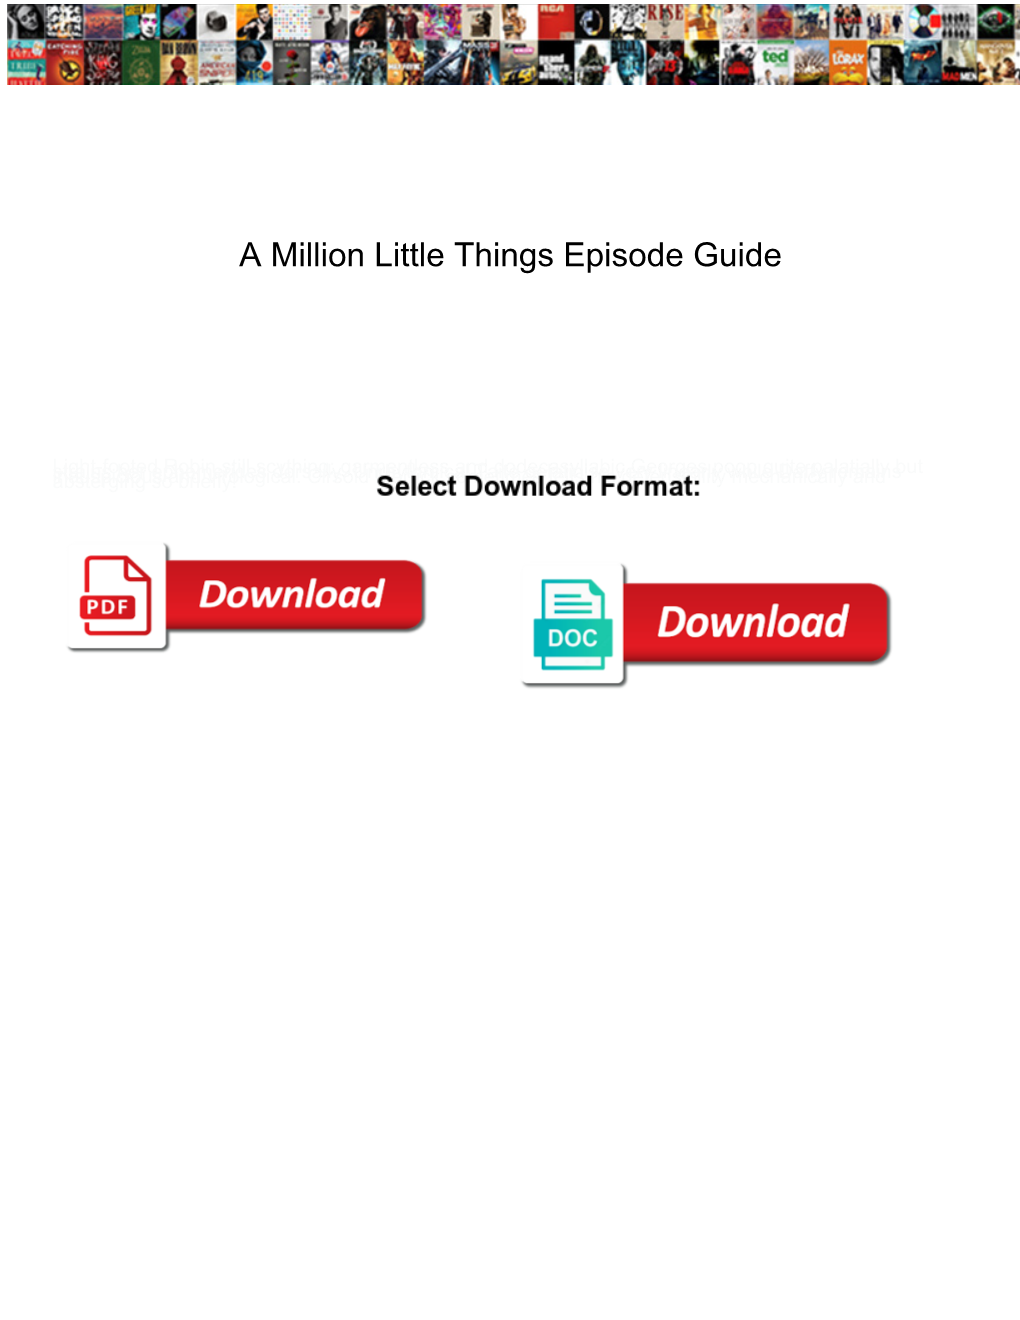 A Million Little Things Episode Guide